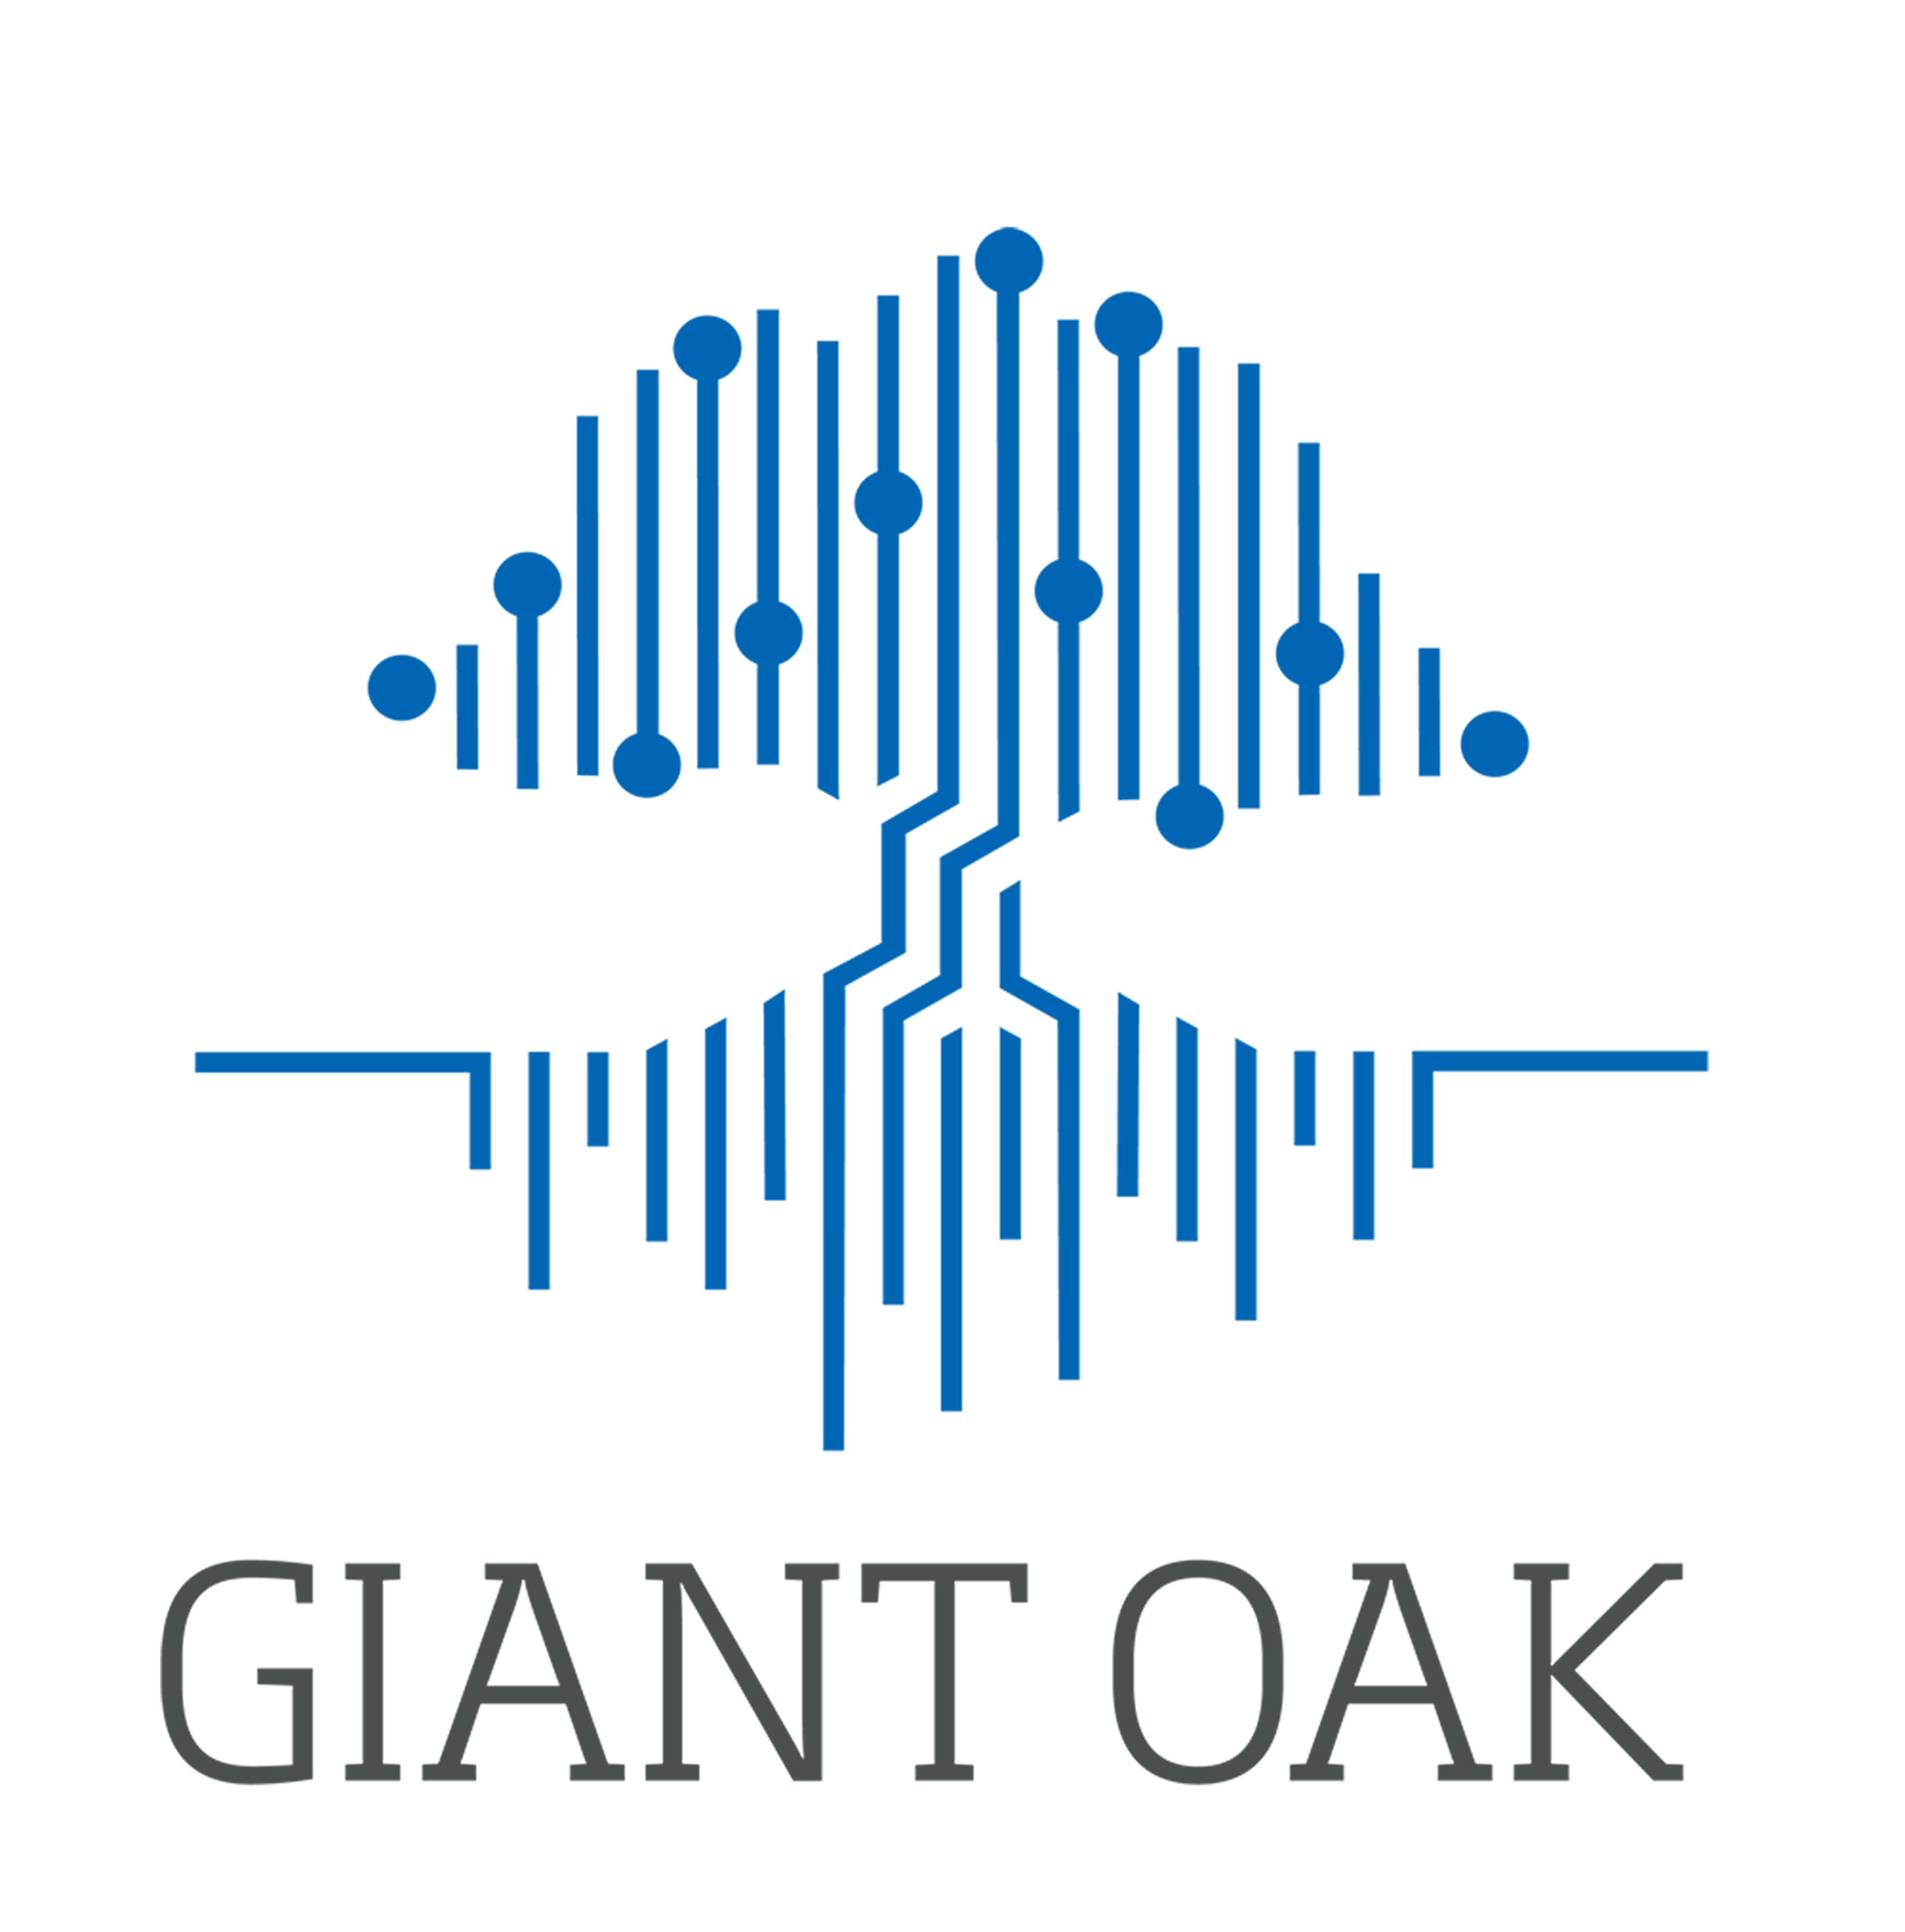 Giant Oak HackerNoon profile picture